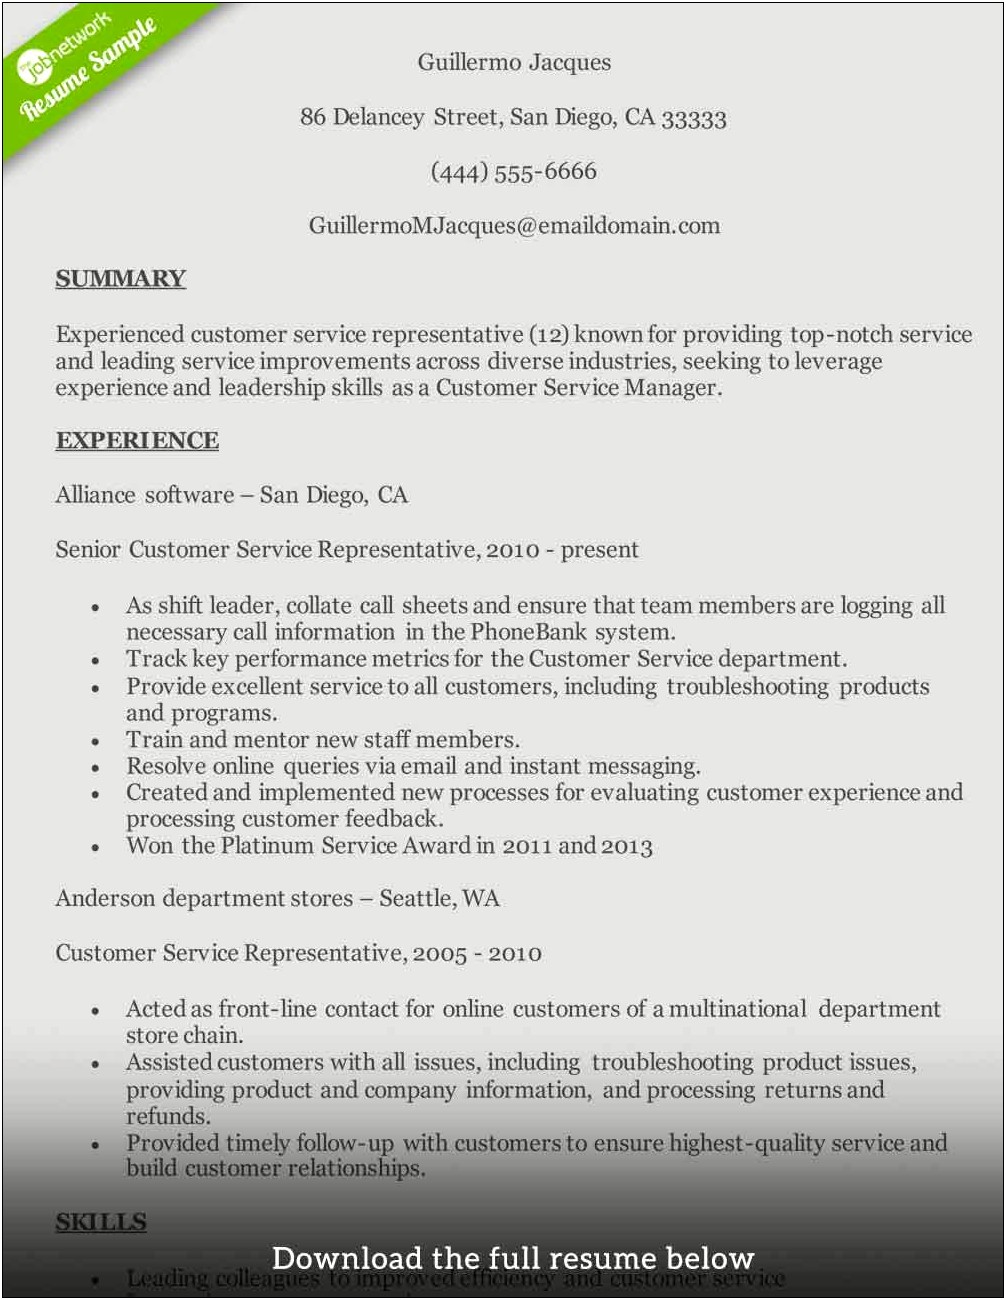 Excellent Customer Service Resume Objective